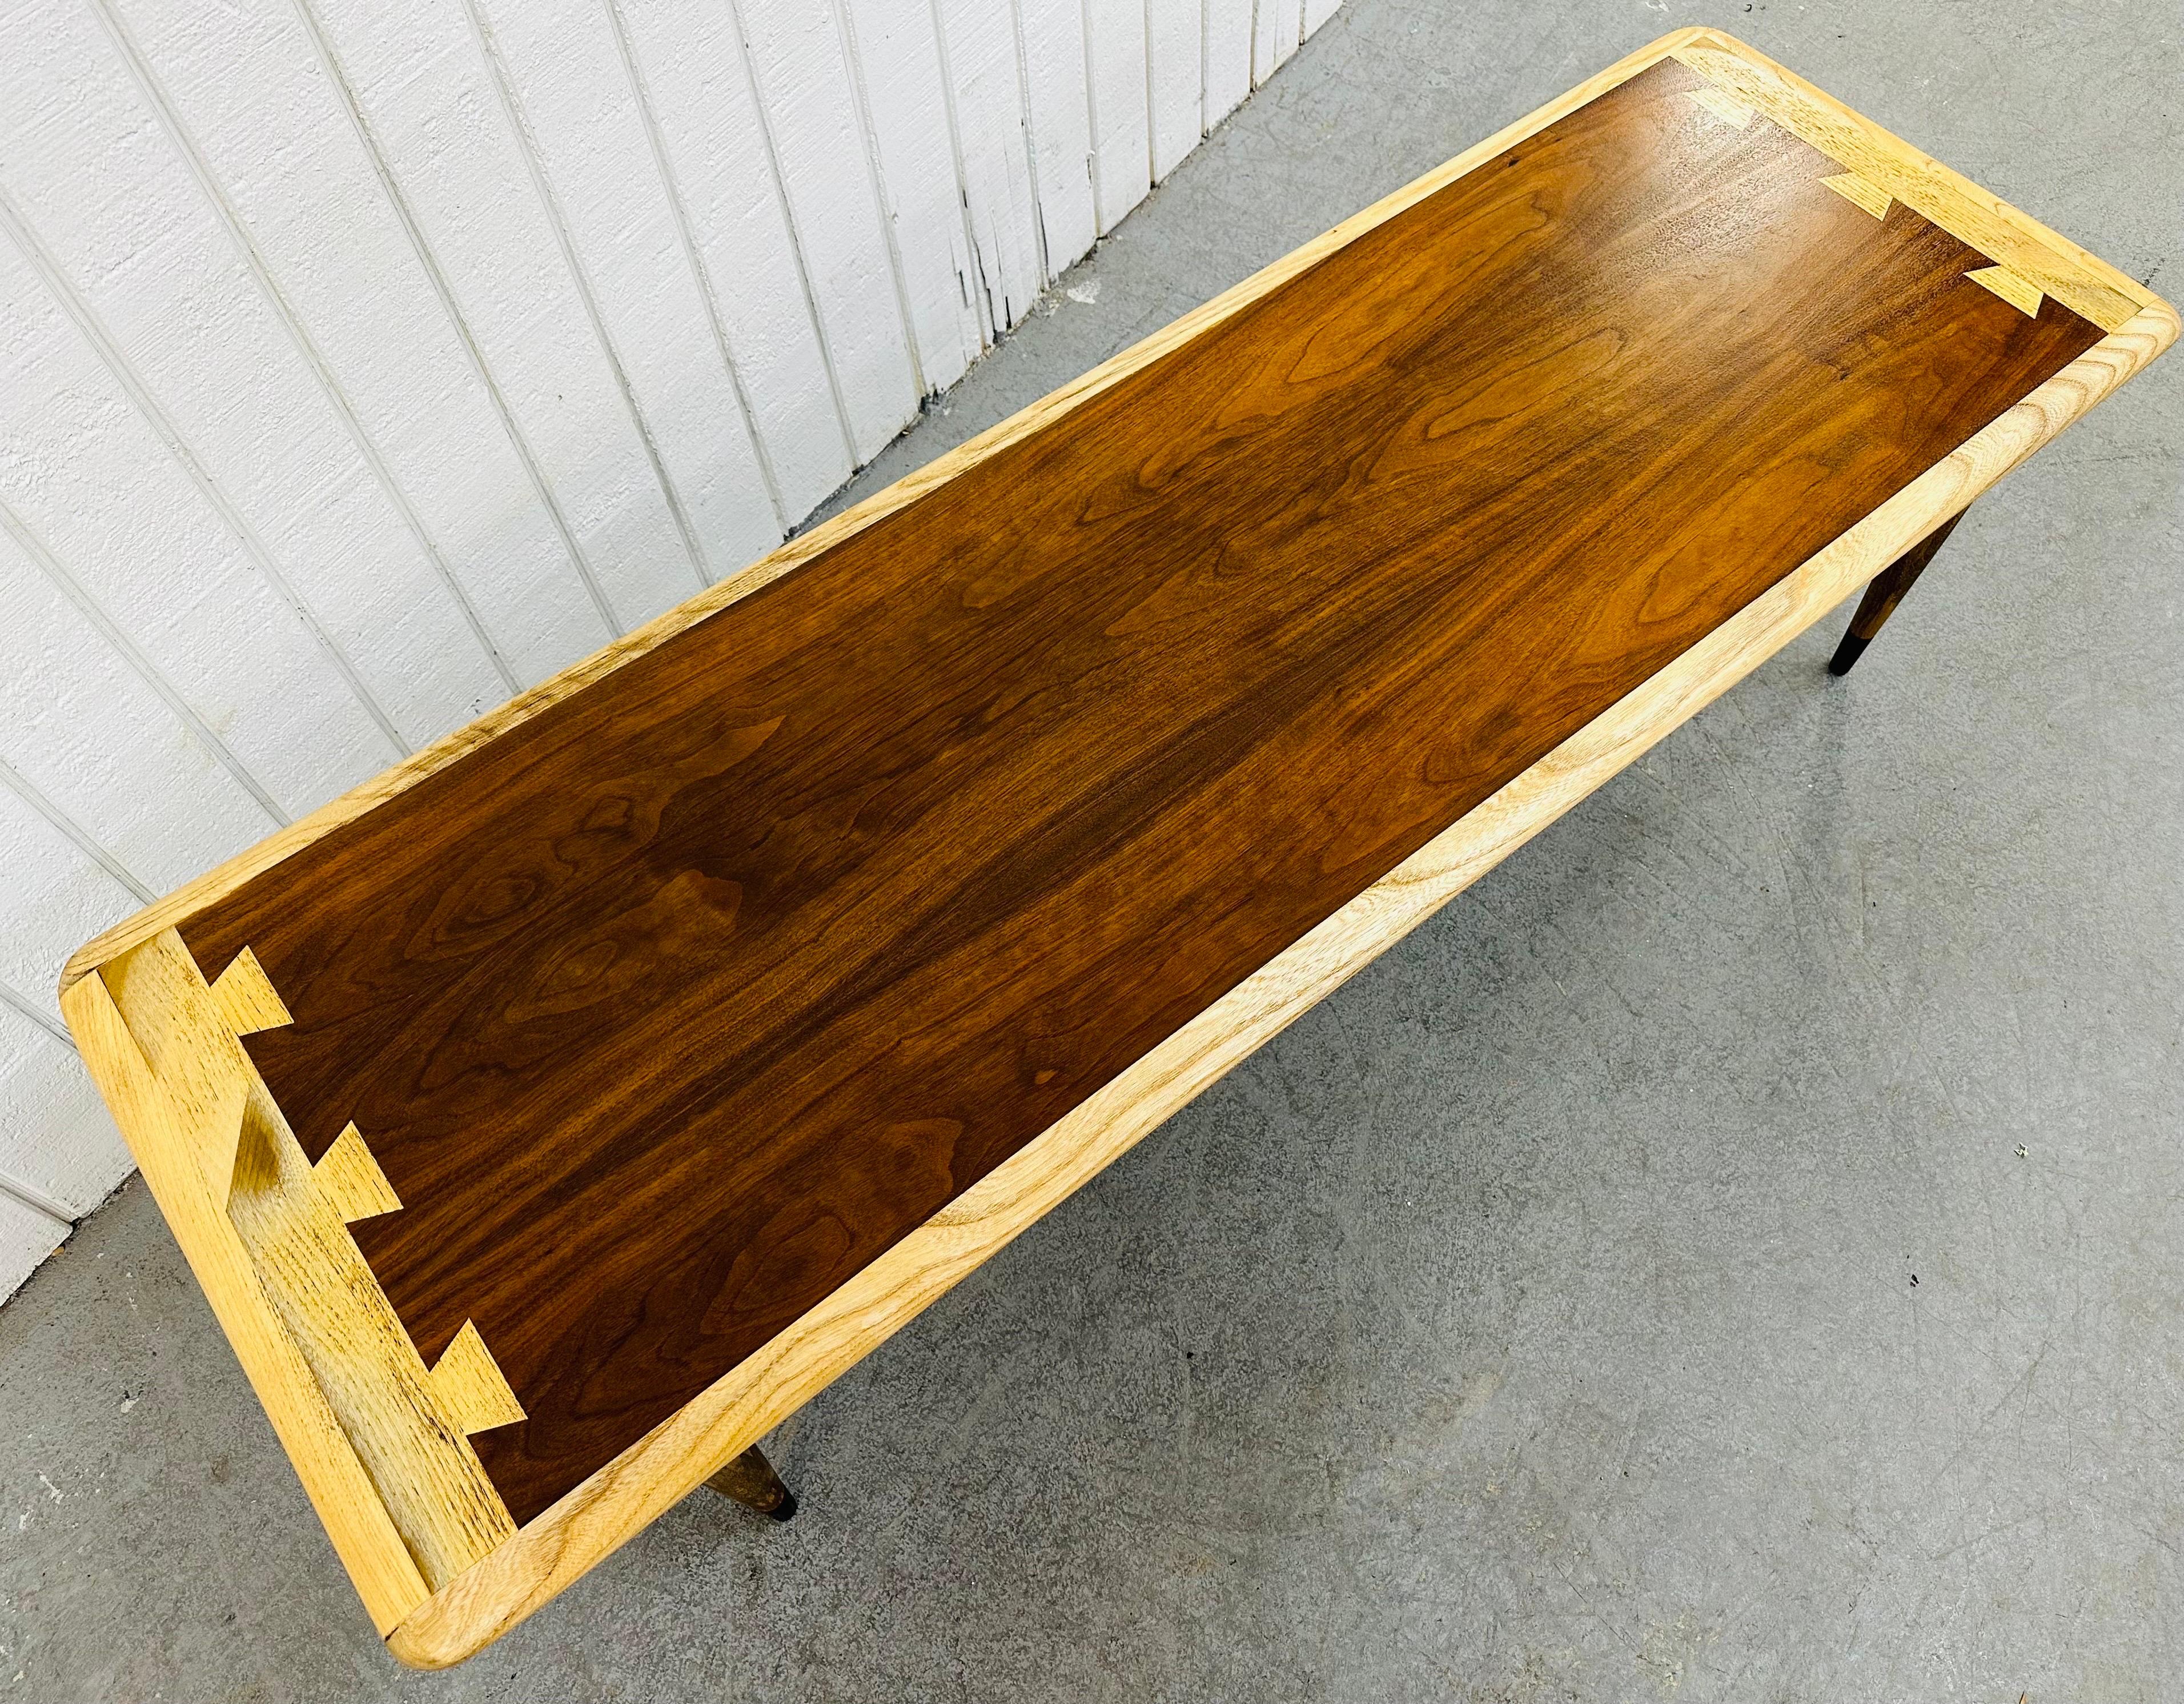 This listing is for a Mid-Century Modern Lane Acclaimed Walnut Coffee Table. Featuring a rectangular top, four modern legs with stretchers, black painted tips, and a beautiful two toned dovetailed top! This is an exceptional combination of quality